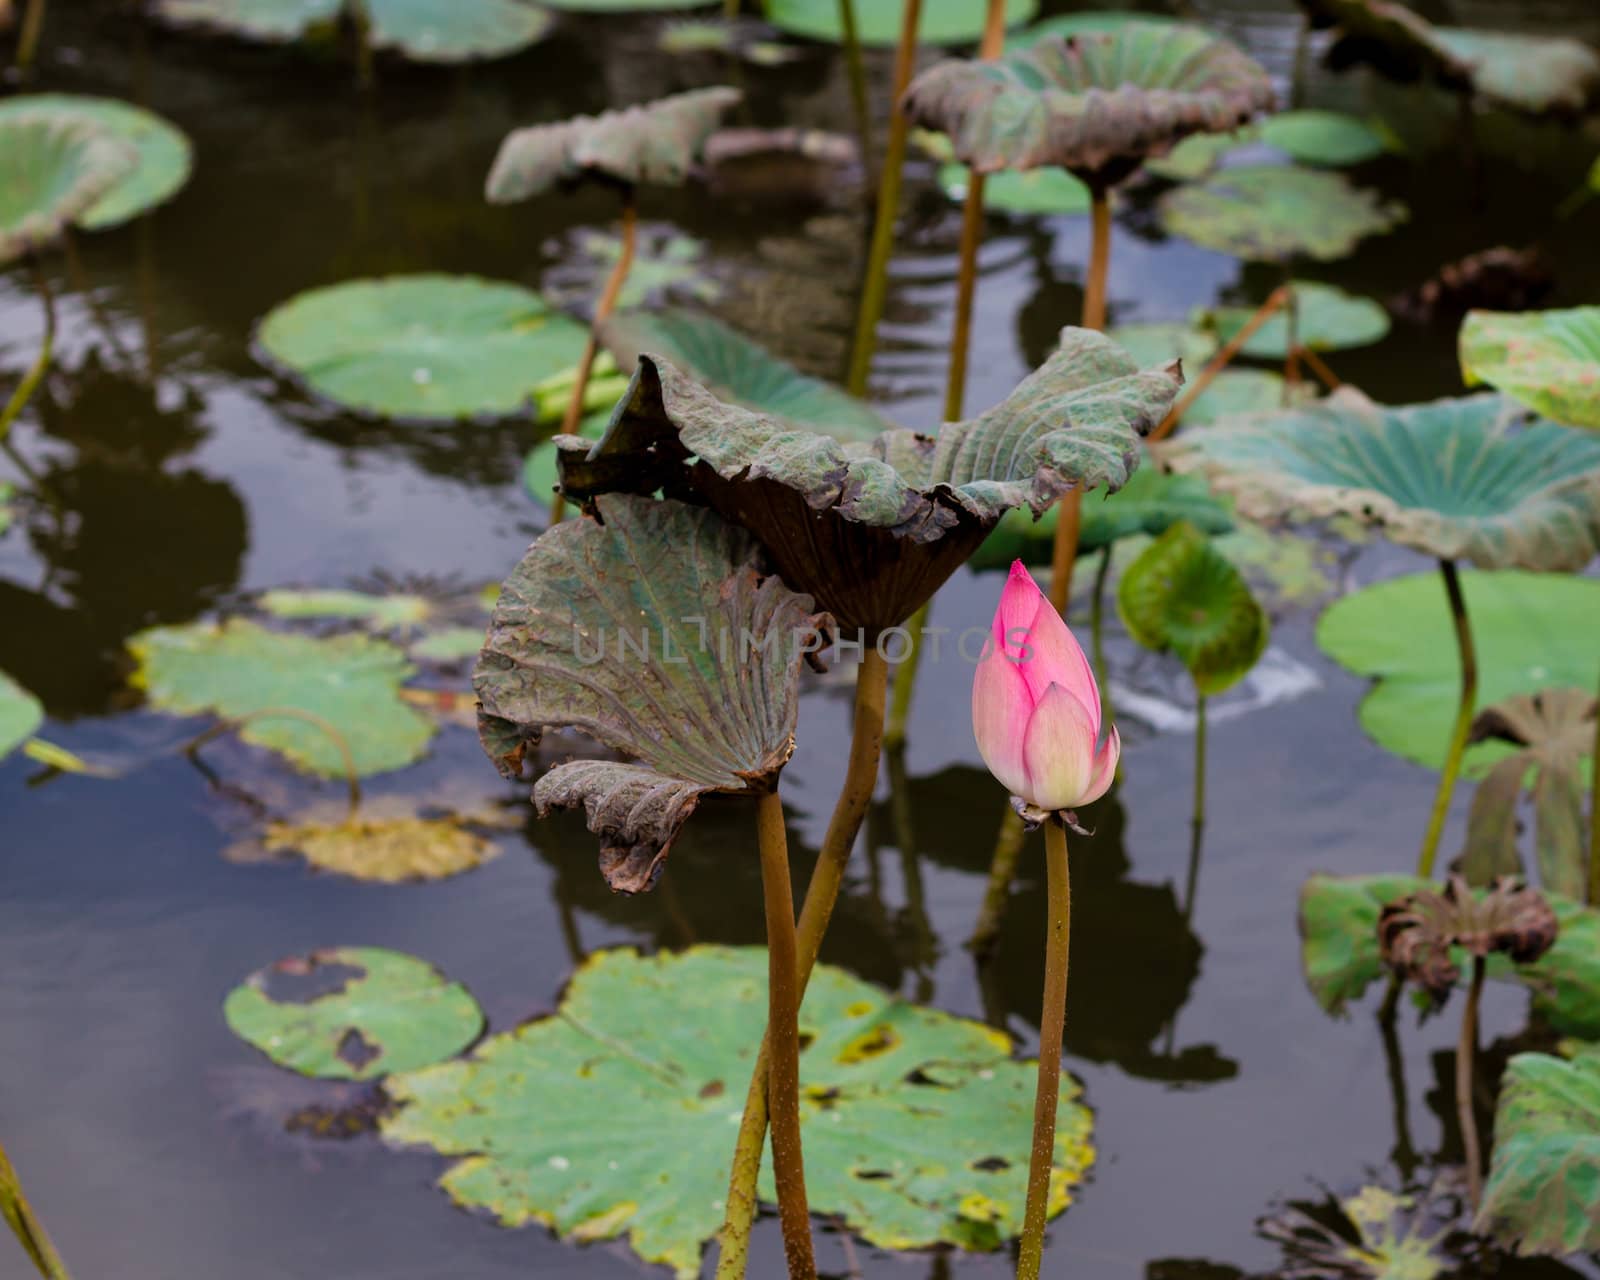 Lotus flower in pond surrounded by lilies